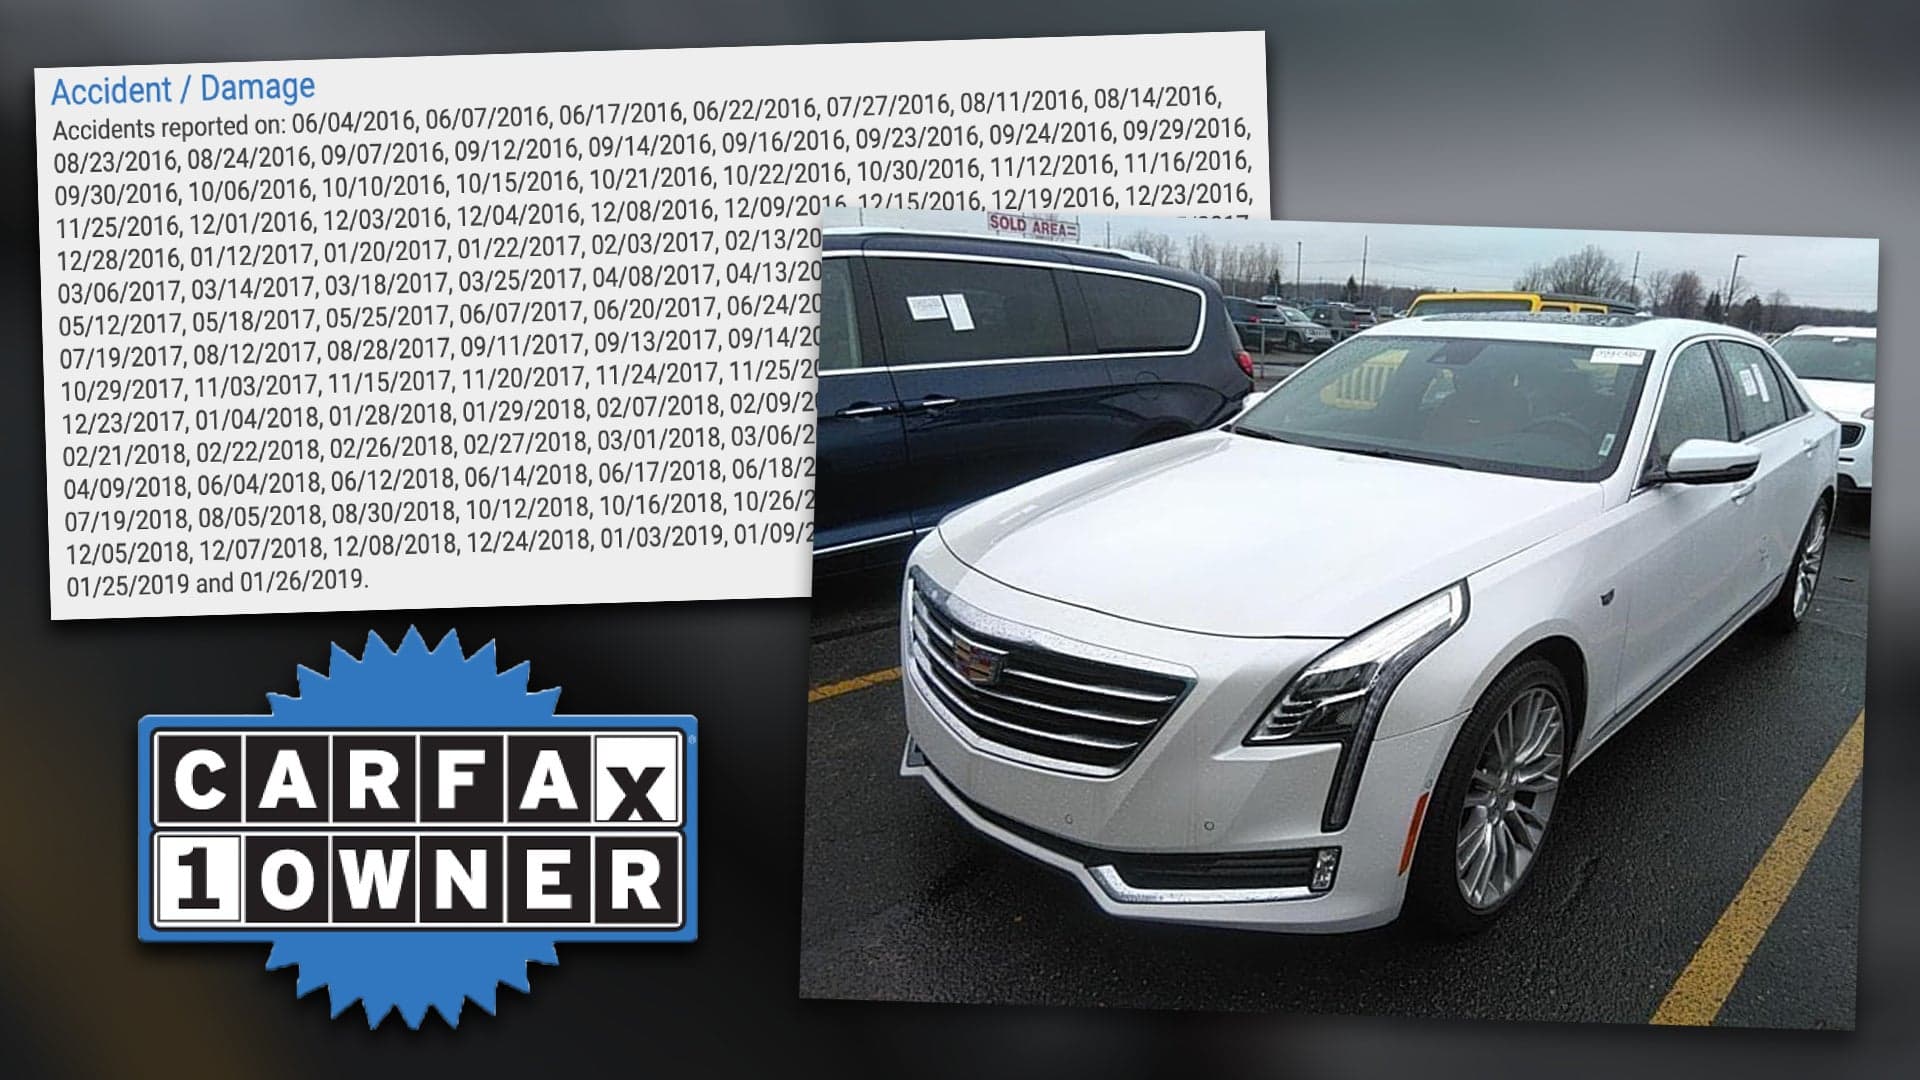 You Won’t Believe How Many Accidents Are on the CarFax for this 2016 Cadillac CT6 (UPDATE)